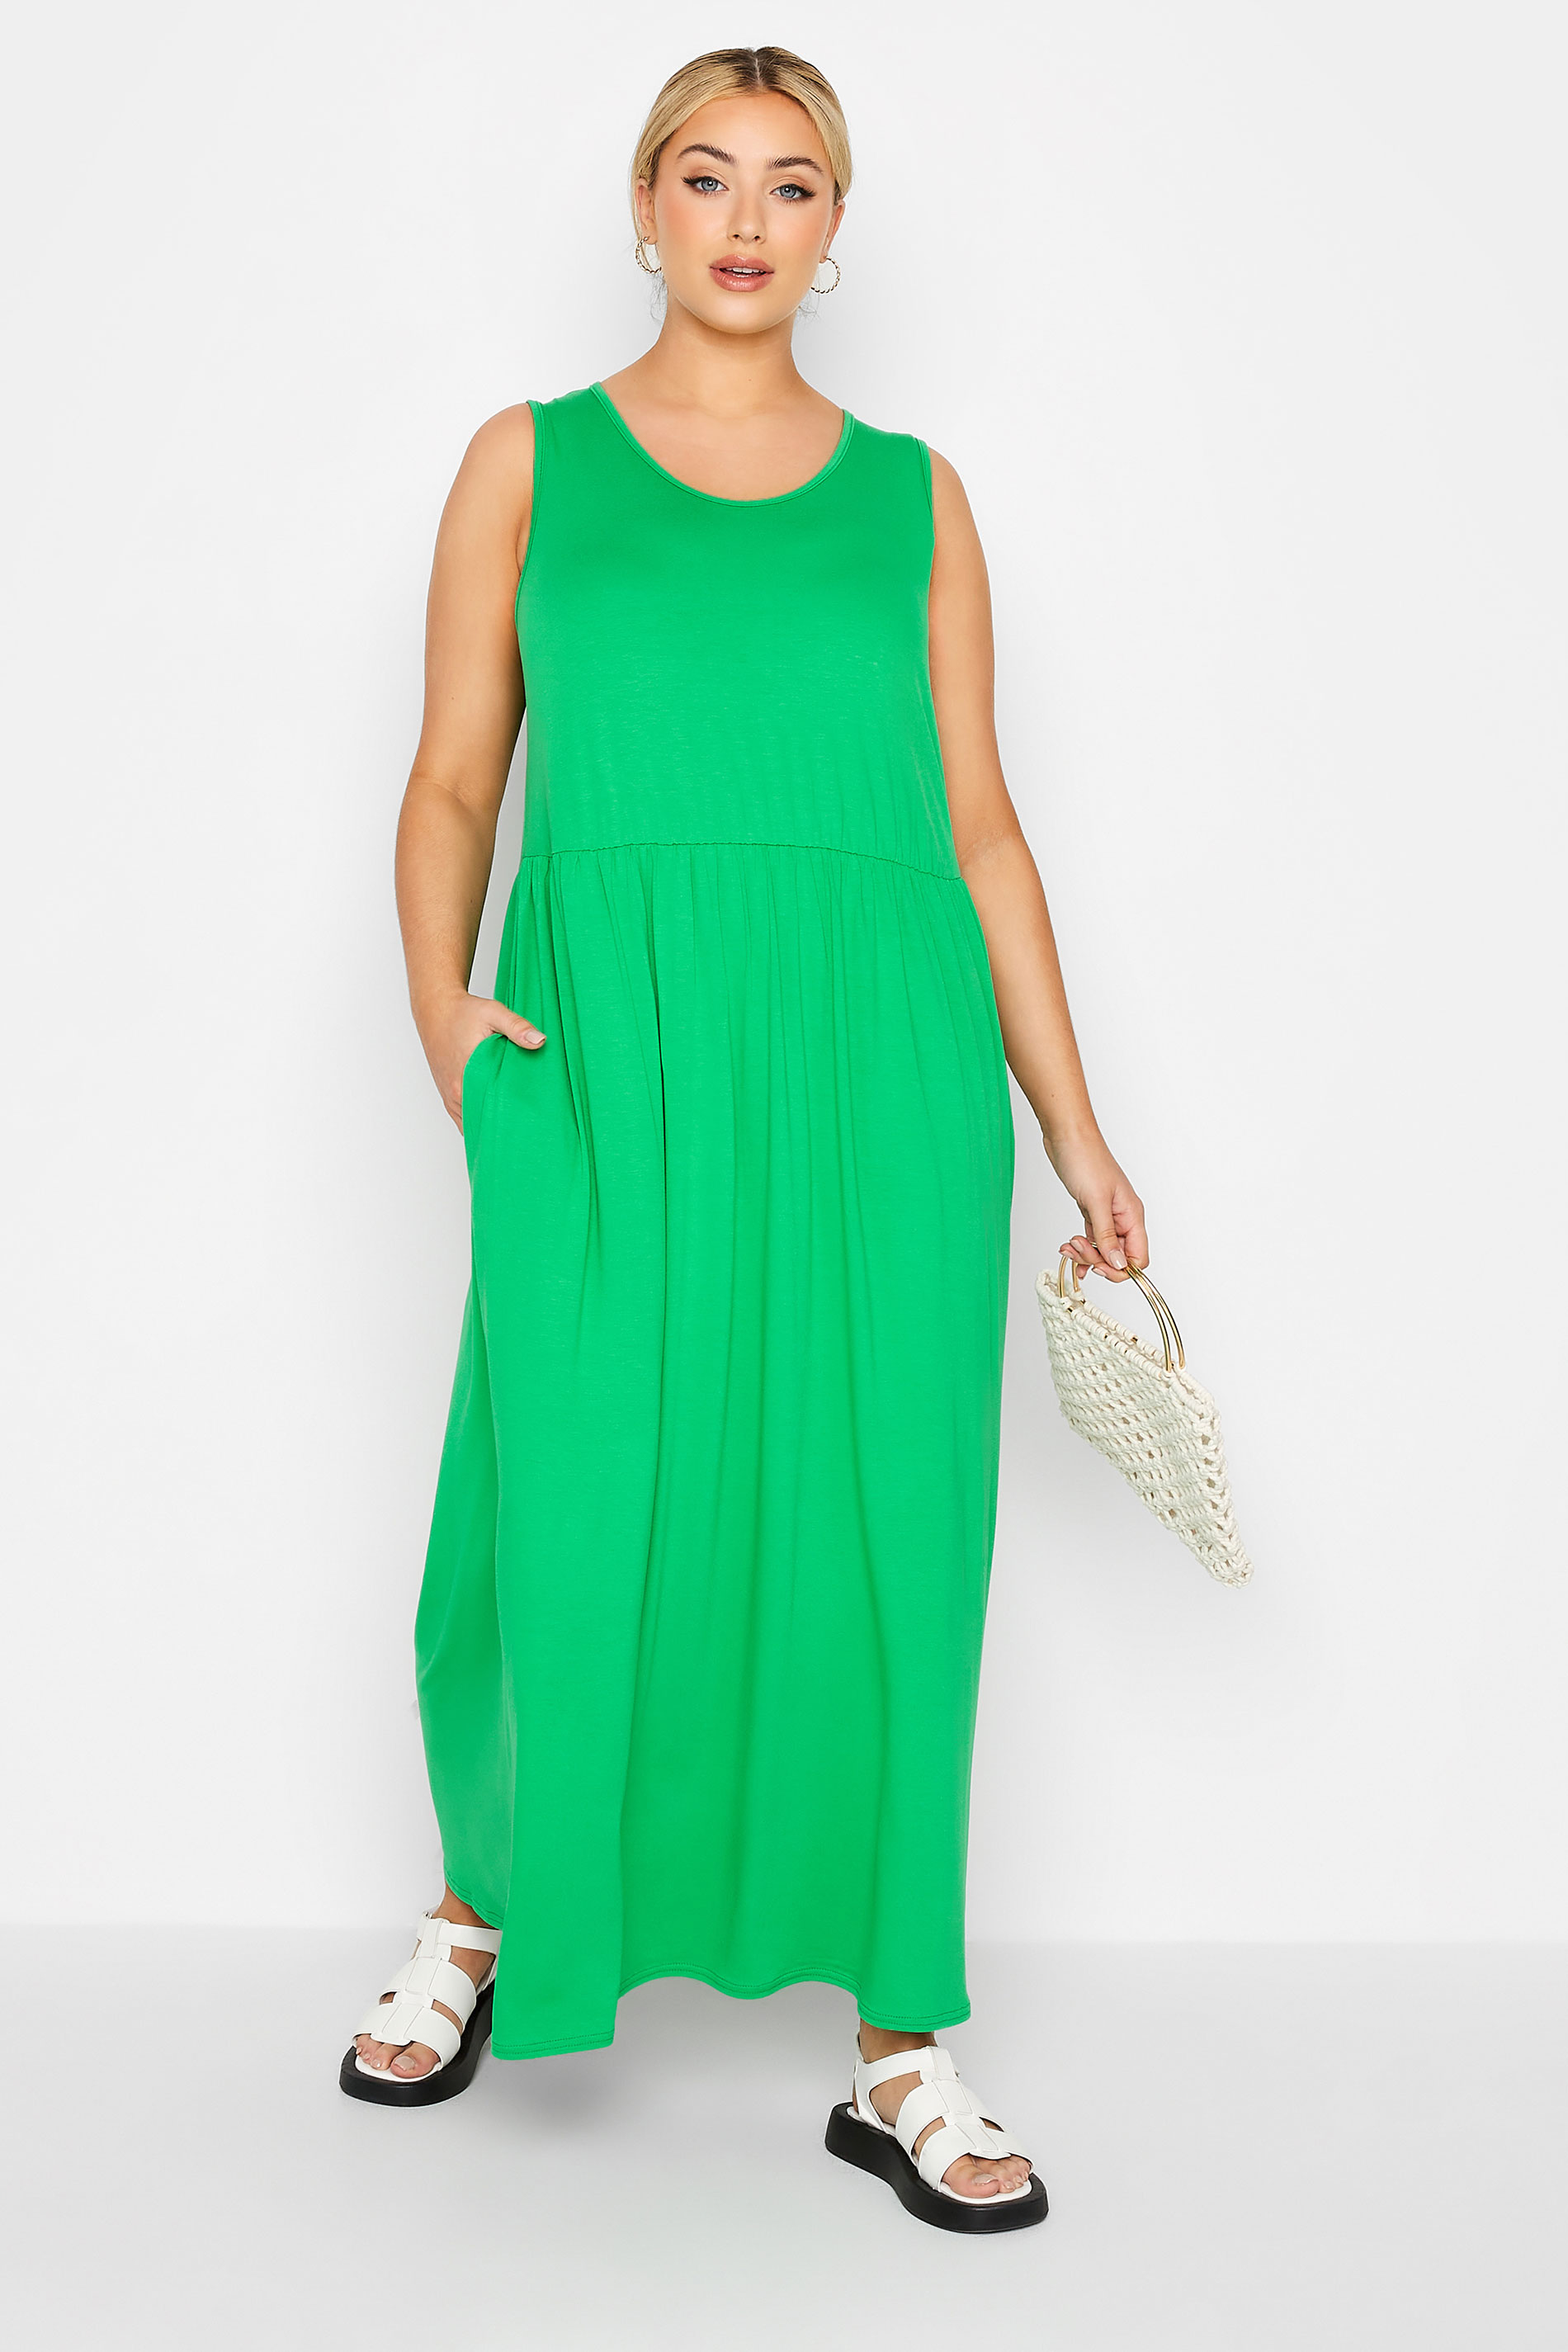 Robes Grande Taille Grande taille  Robes Longues | LIMITED COLLECTION - Robe Verte Maxi à Poches - GP75918